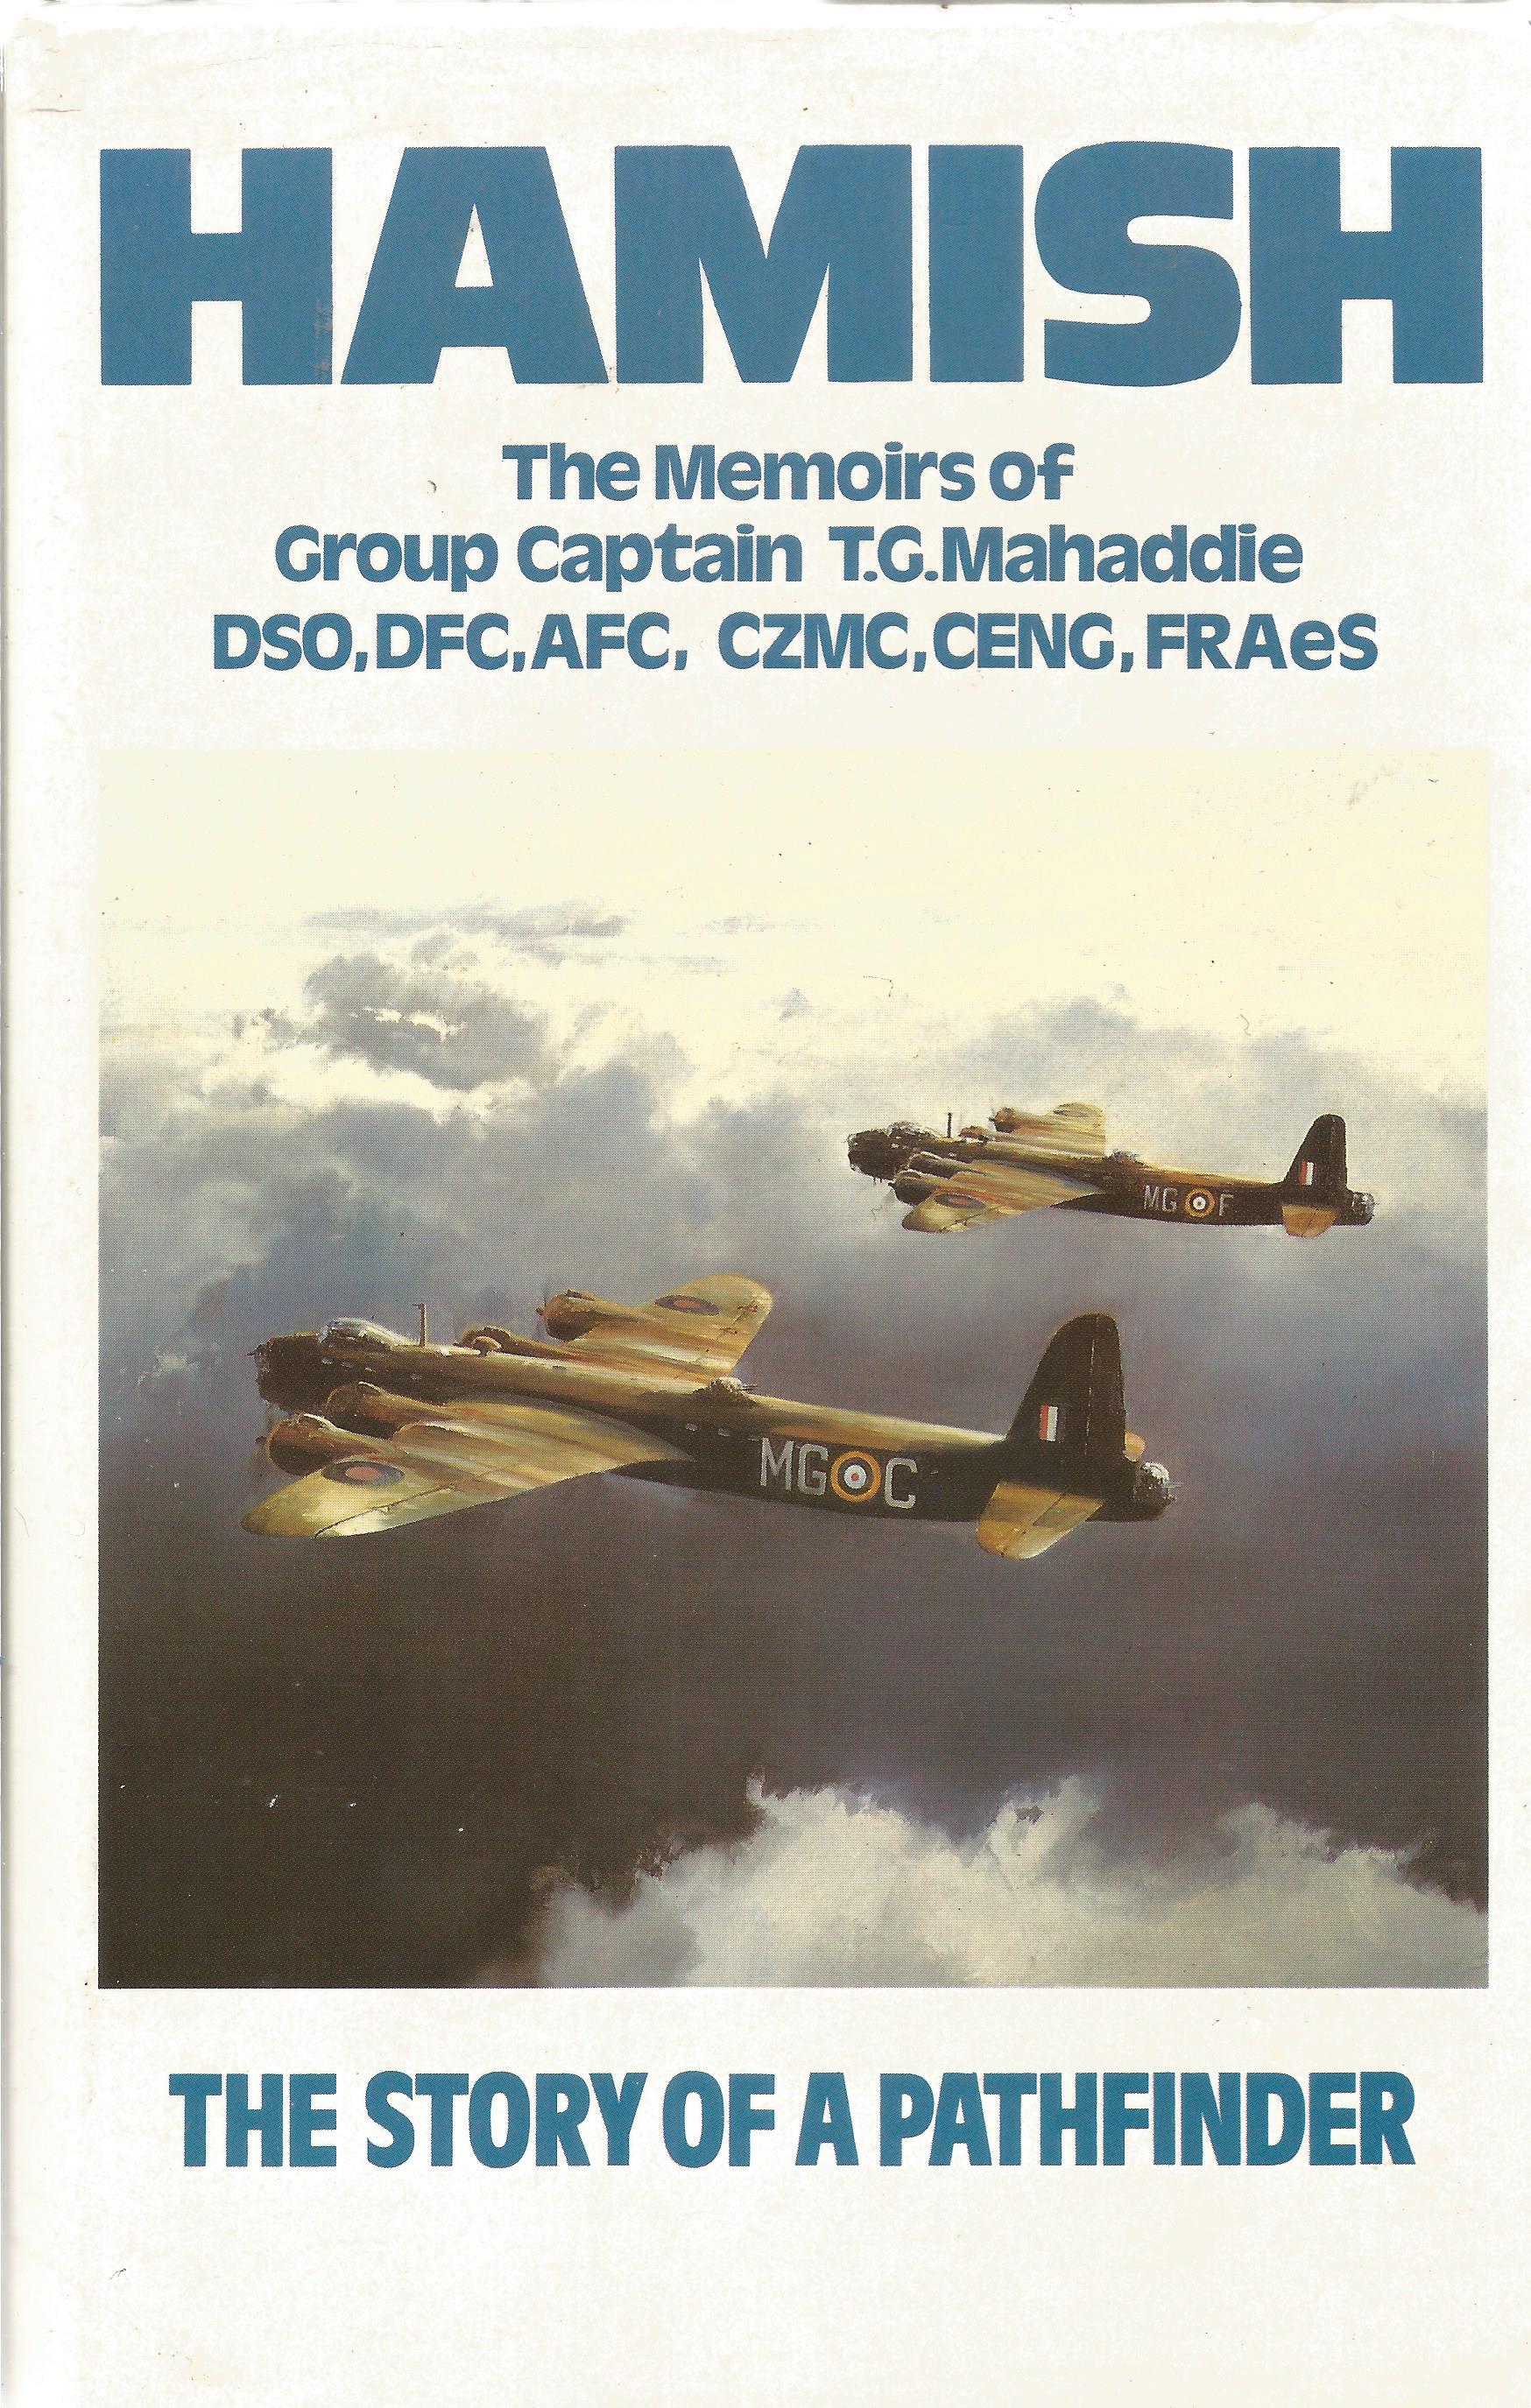 WW2. Multi Signed Book Titled 'Hamish' Memoirs of Grp Cptn TG Mahaddie DSO DFC AFC CZMC CENG